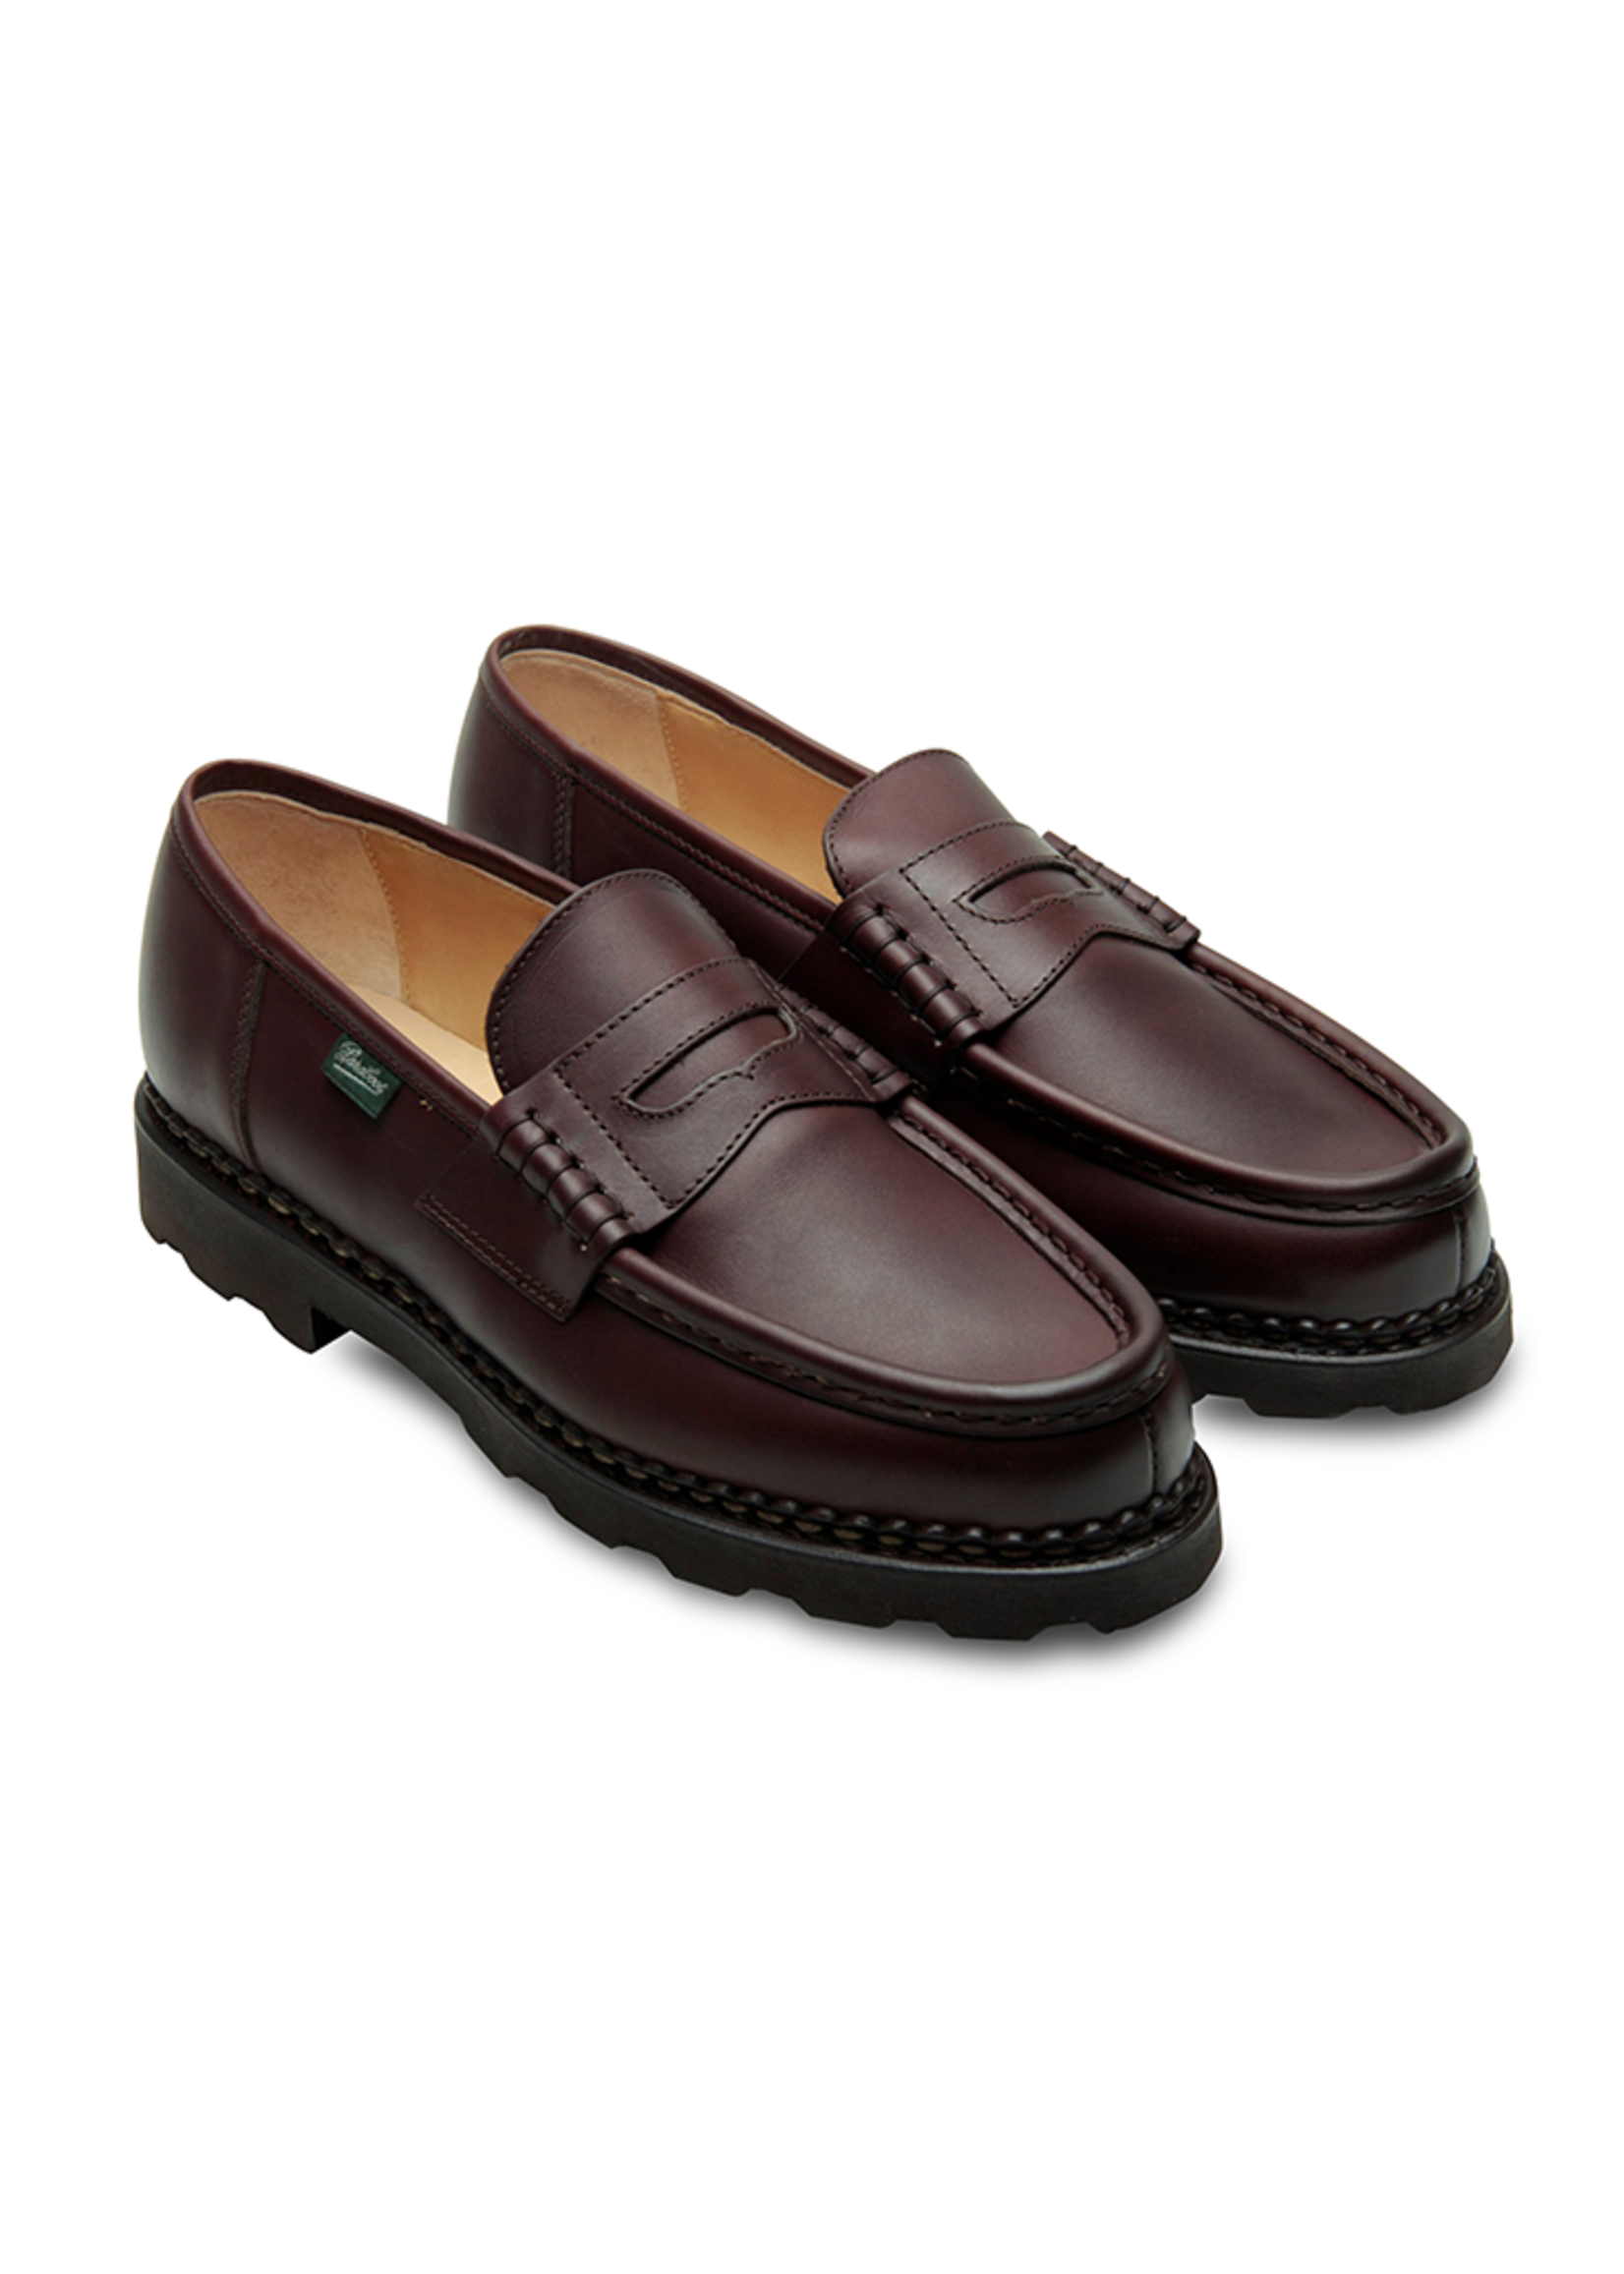 Paraboot Paraboot Reims Marron Cafe Beefroll Penny Loafer